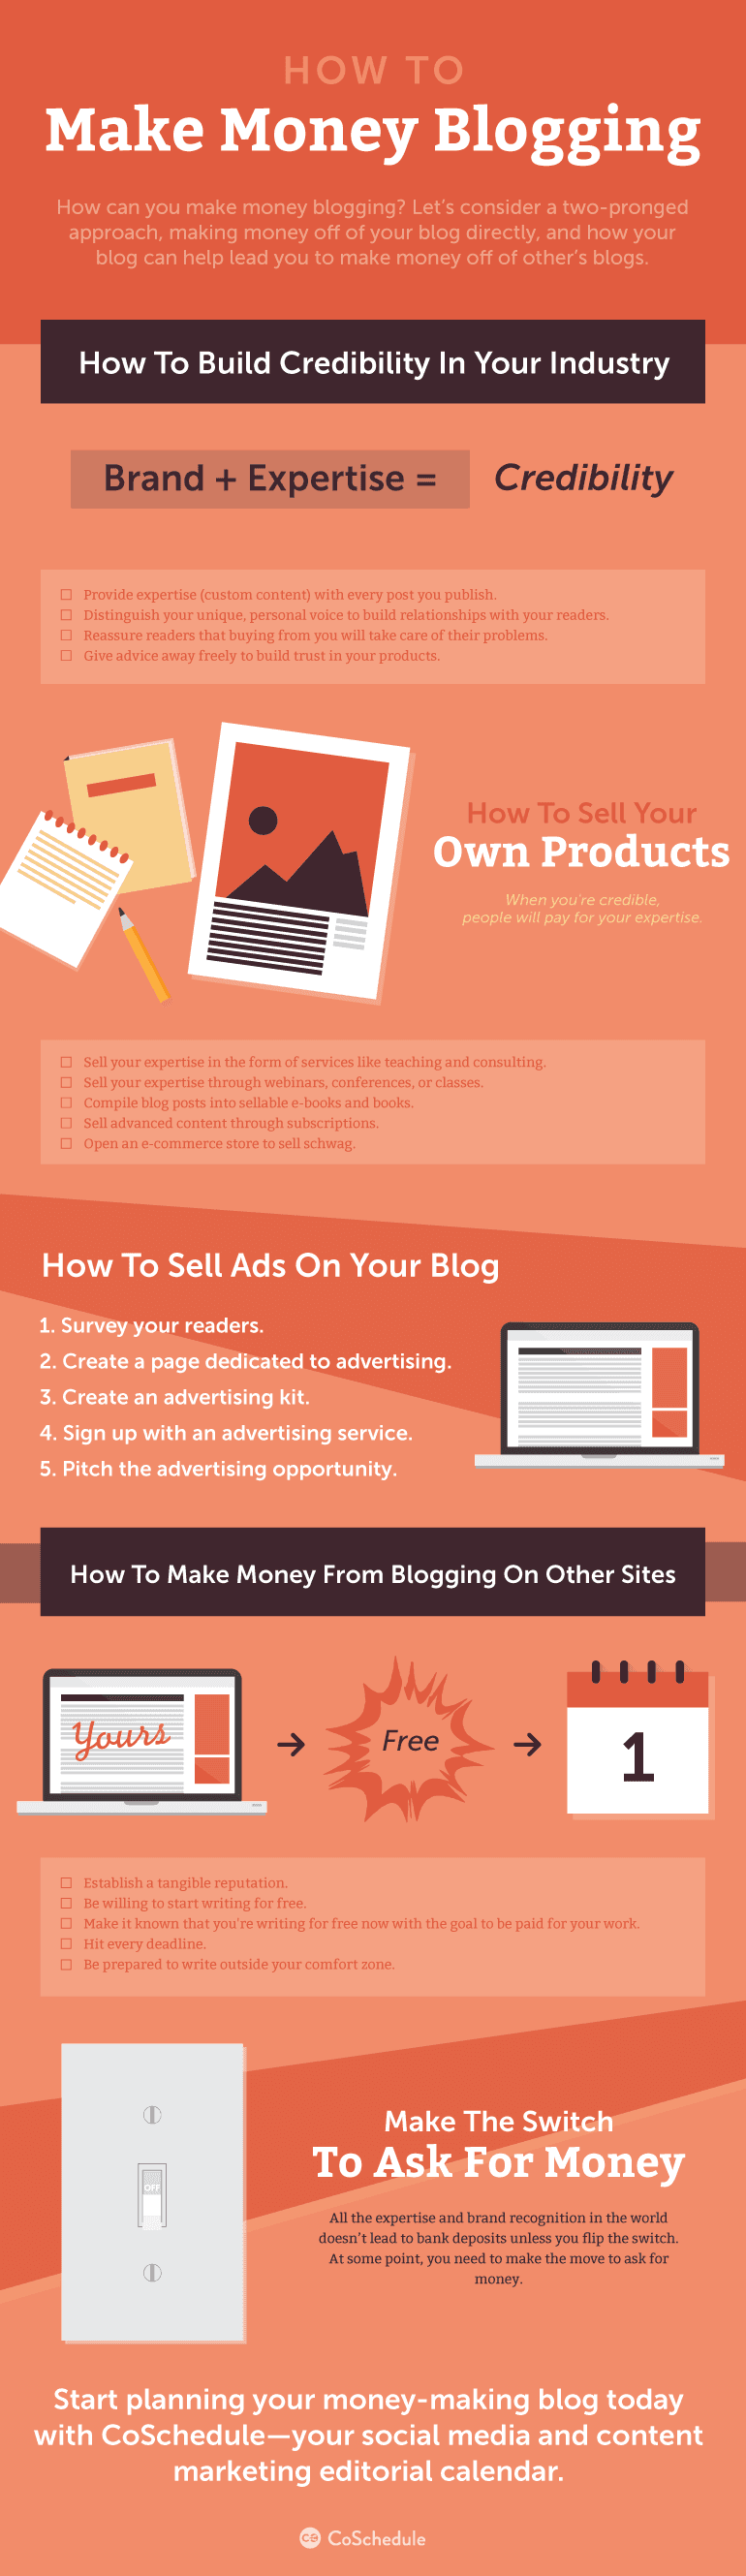 What Does Start A Blog That Makes Money Mean?